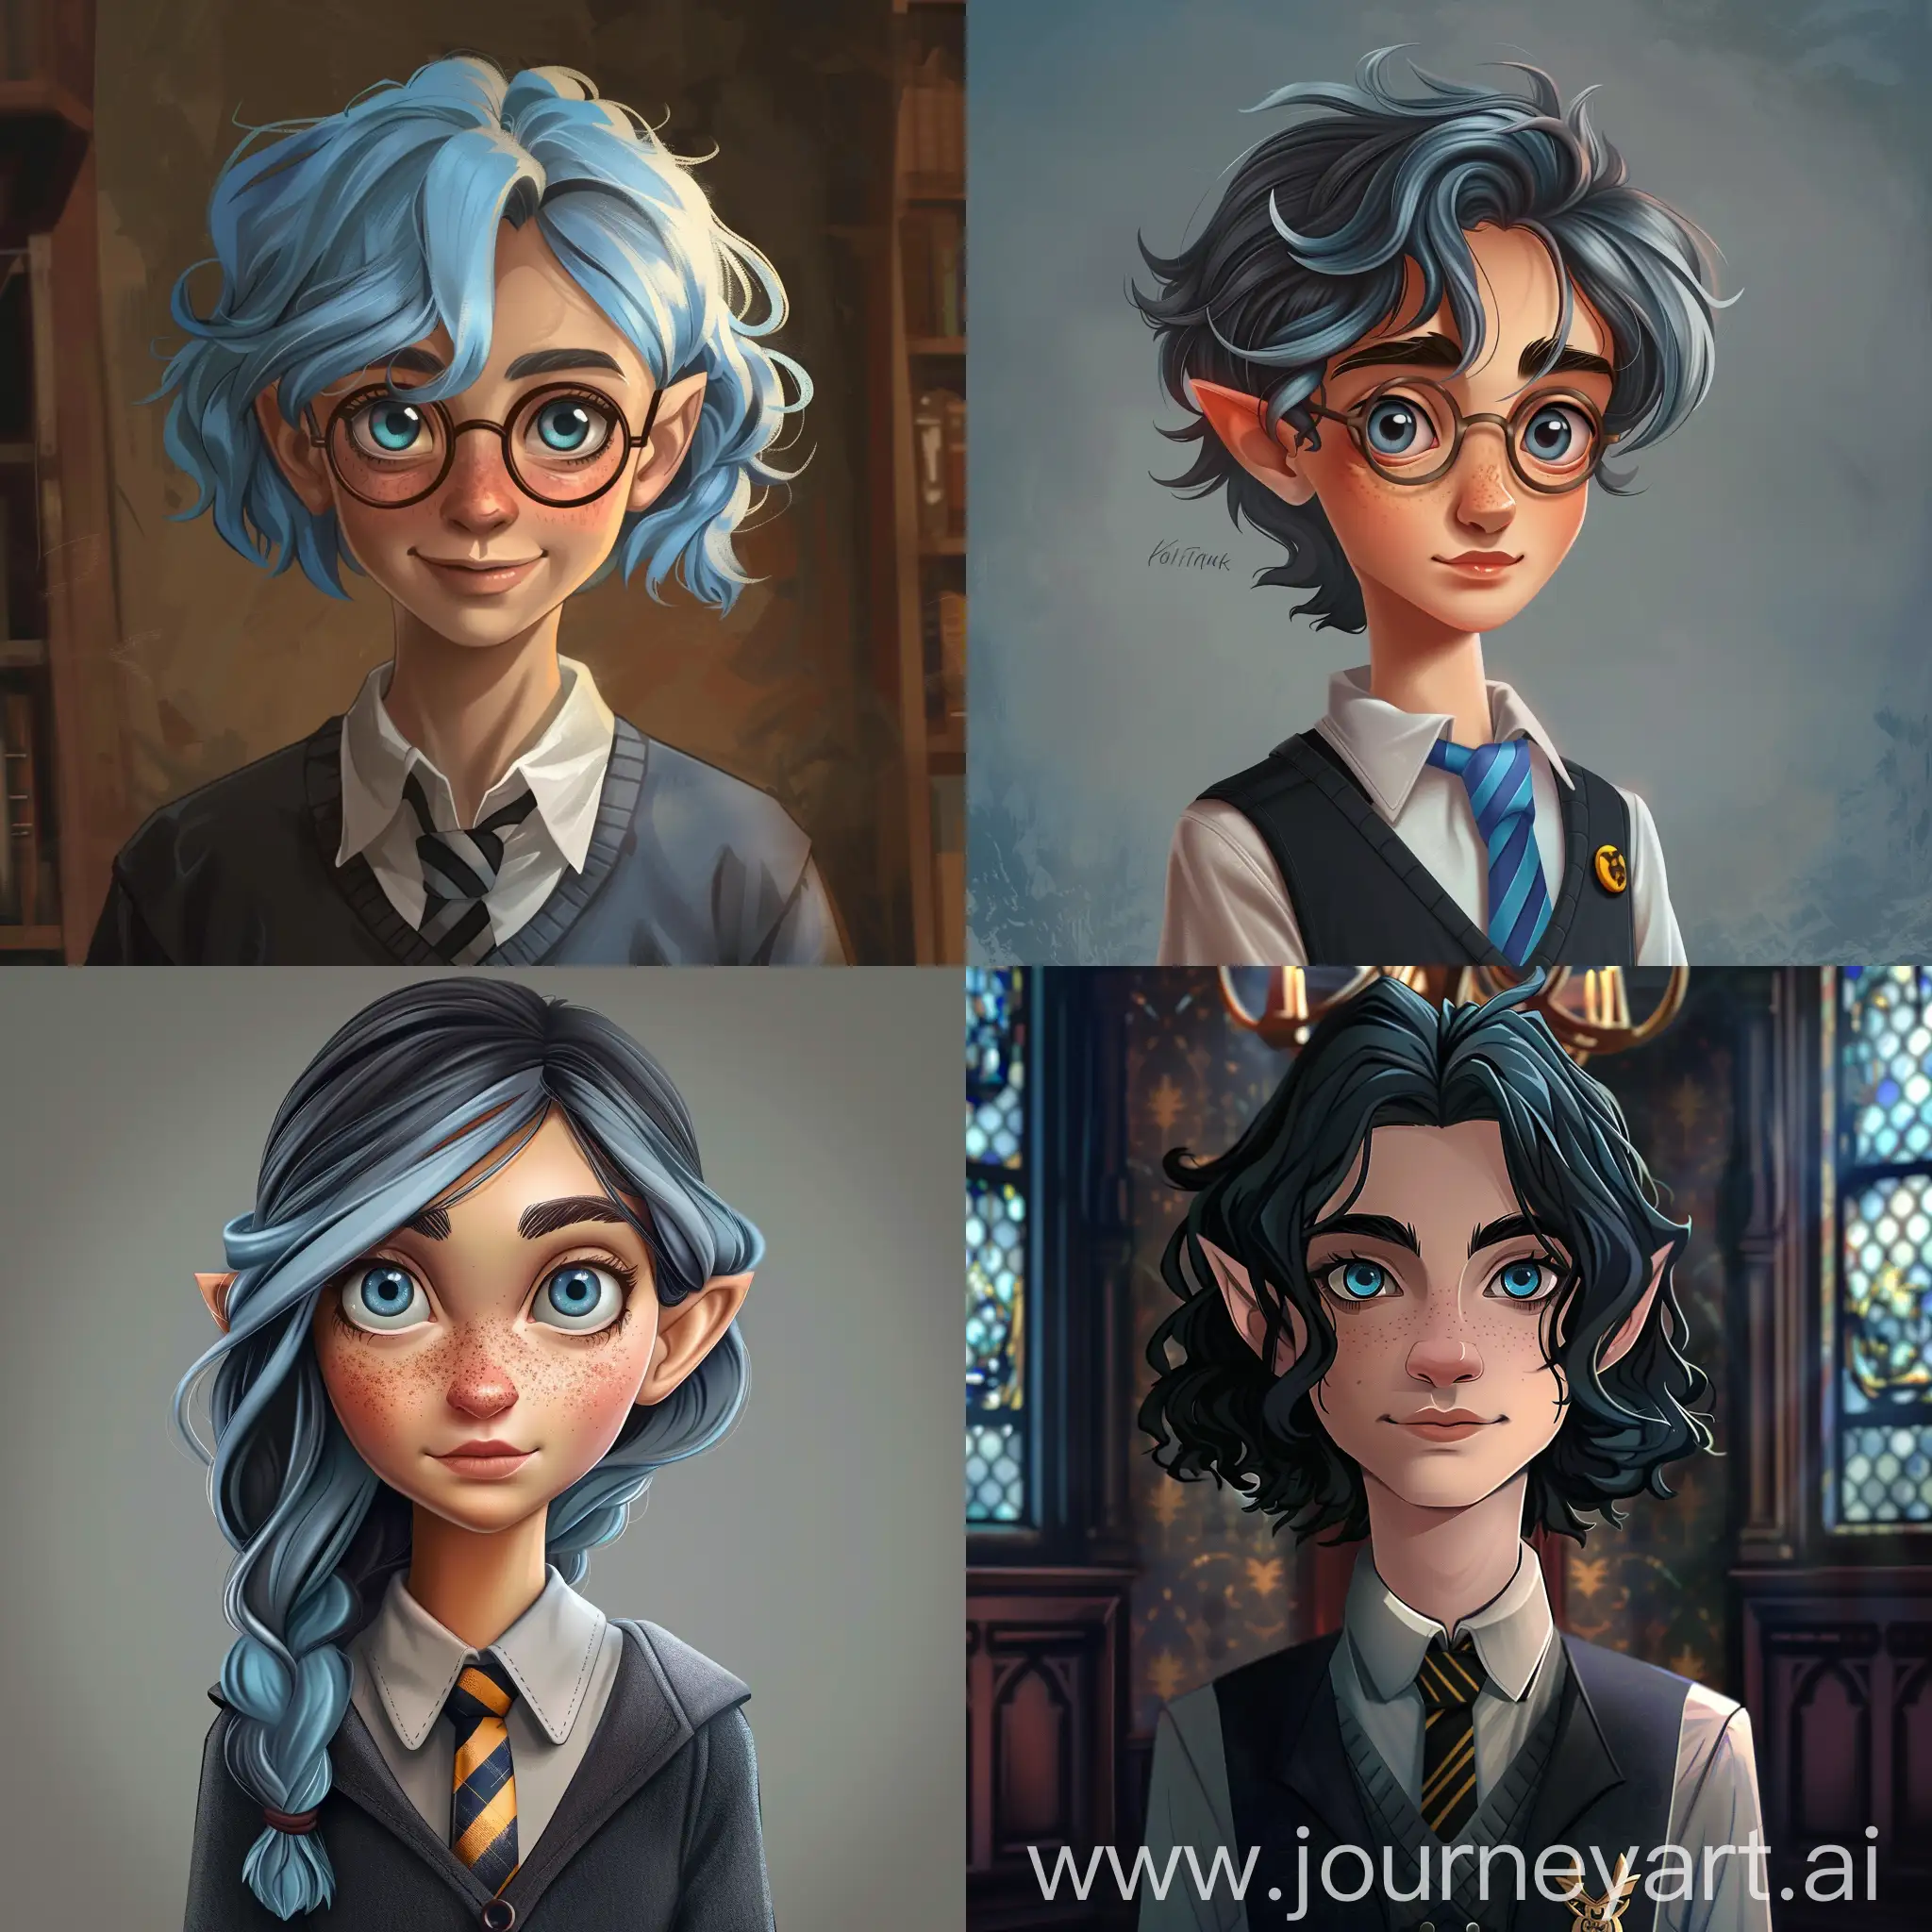 Young-Hogwarts-Gryffindor-Student-with-Hazel-Eyes-and-Blue-Striped-Hair-Cartoon-Art